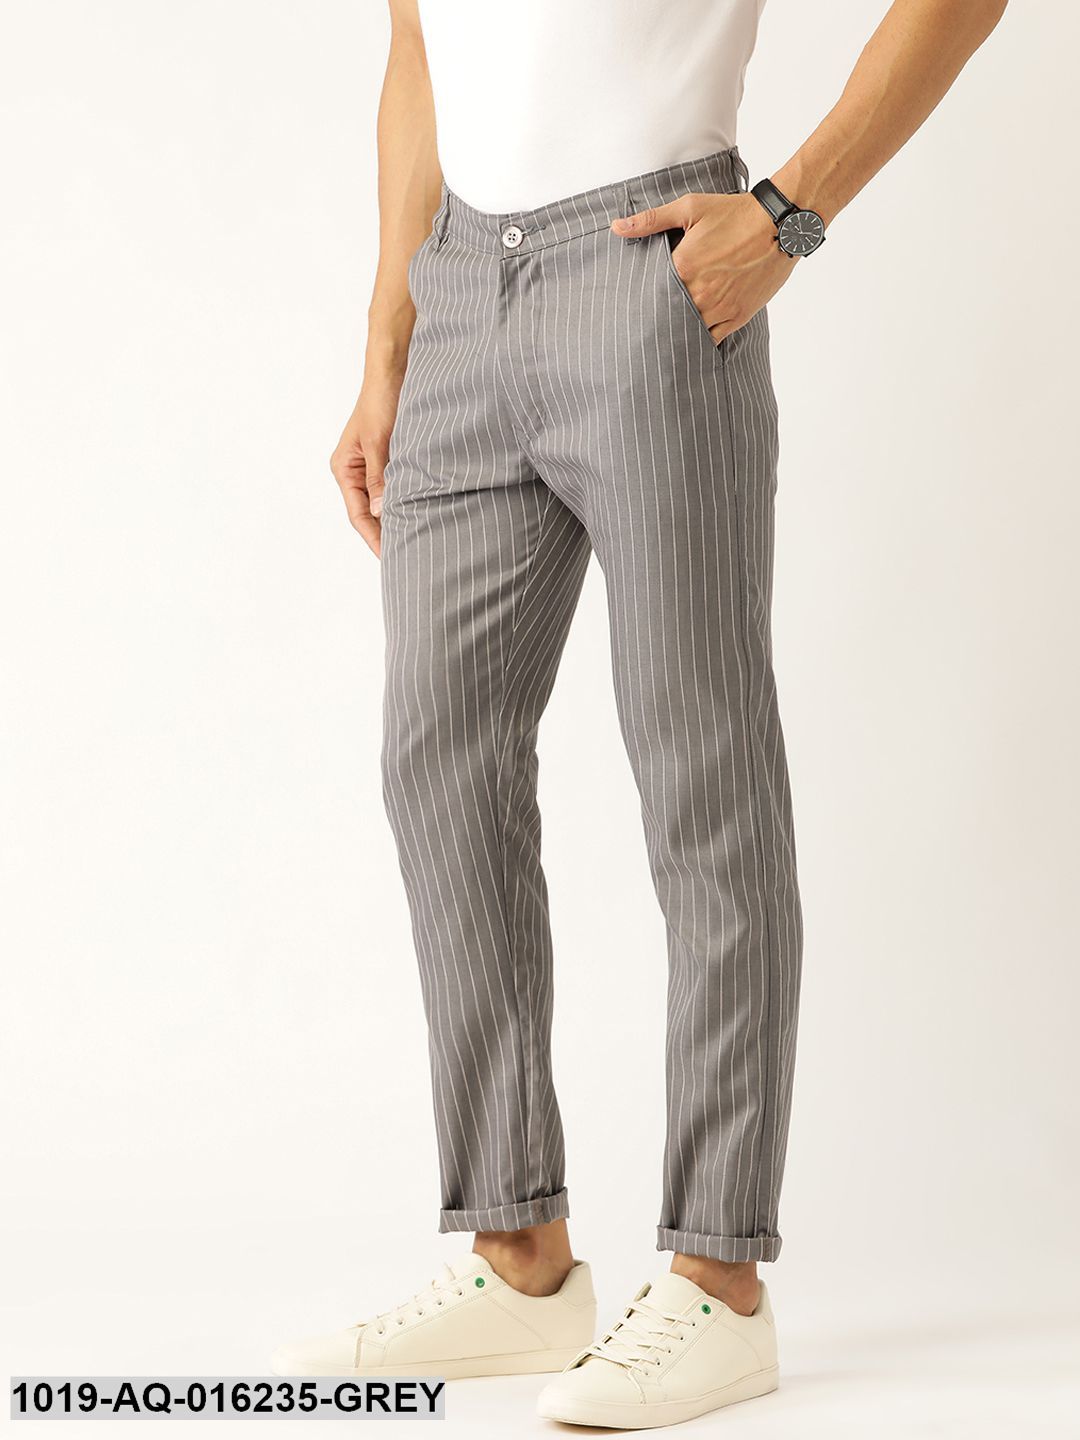 Men's Cotton Blend Grey & Off-white Striped Casual Trousers - Sojanya